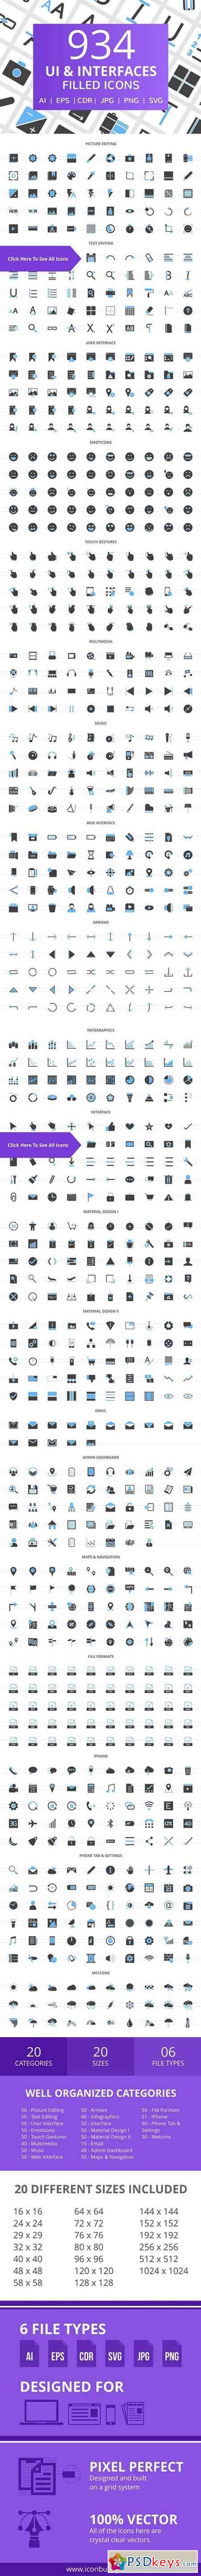 934 UI & Interfaces Filled Icons 2402731